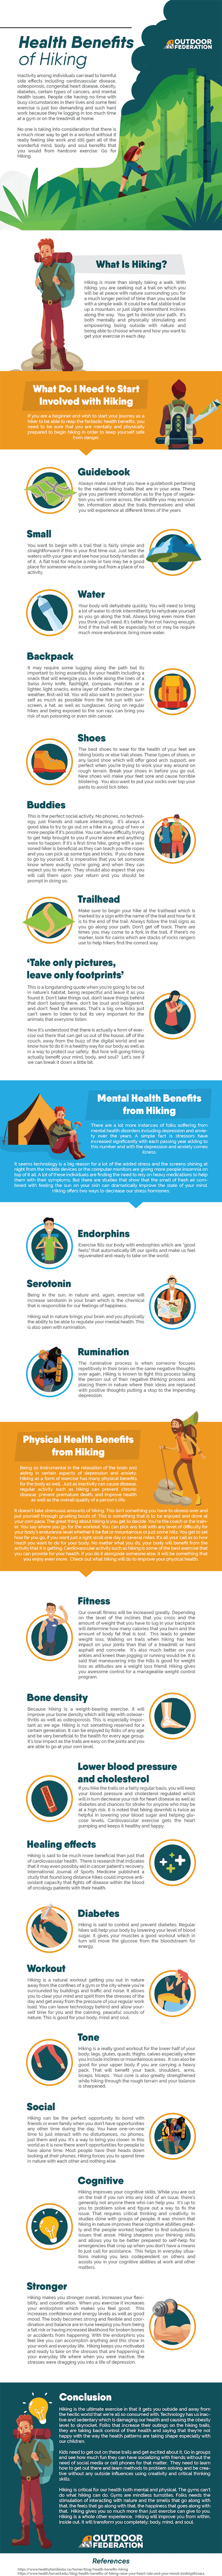 Health Benefits of Hiking #infographic